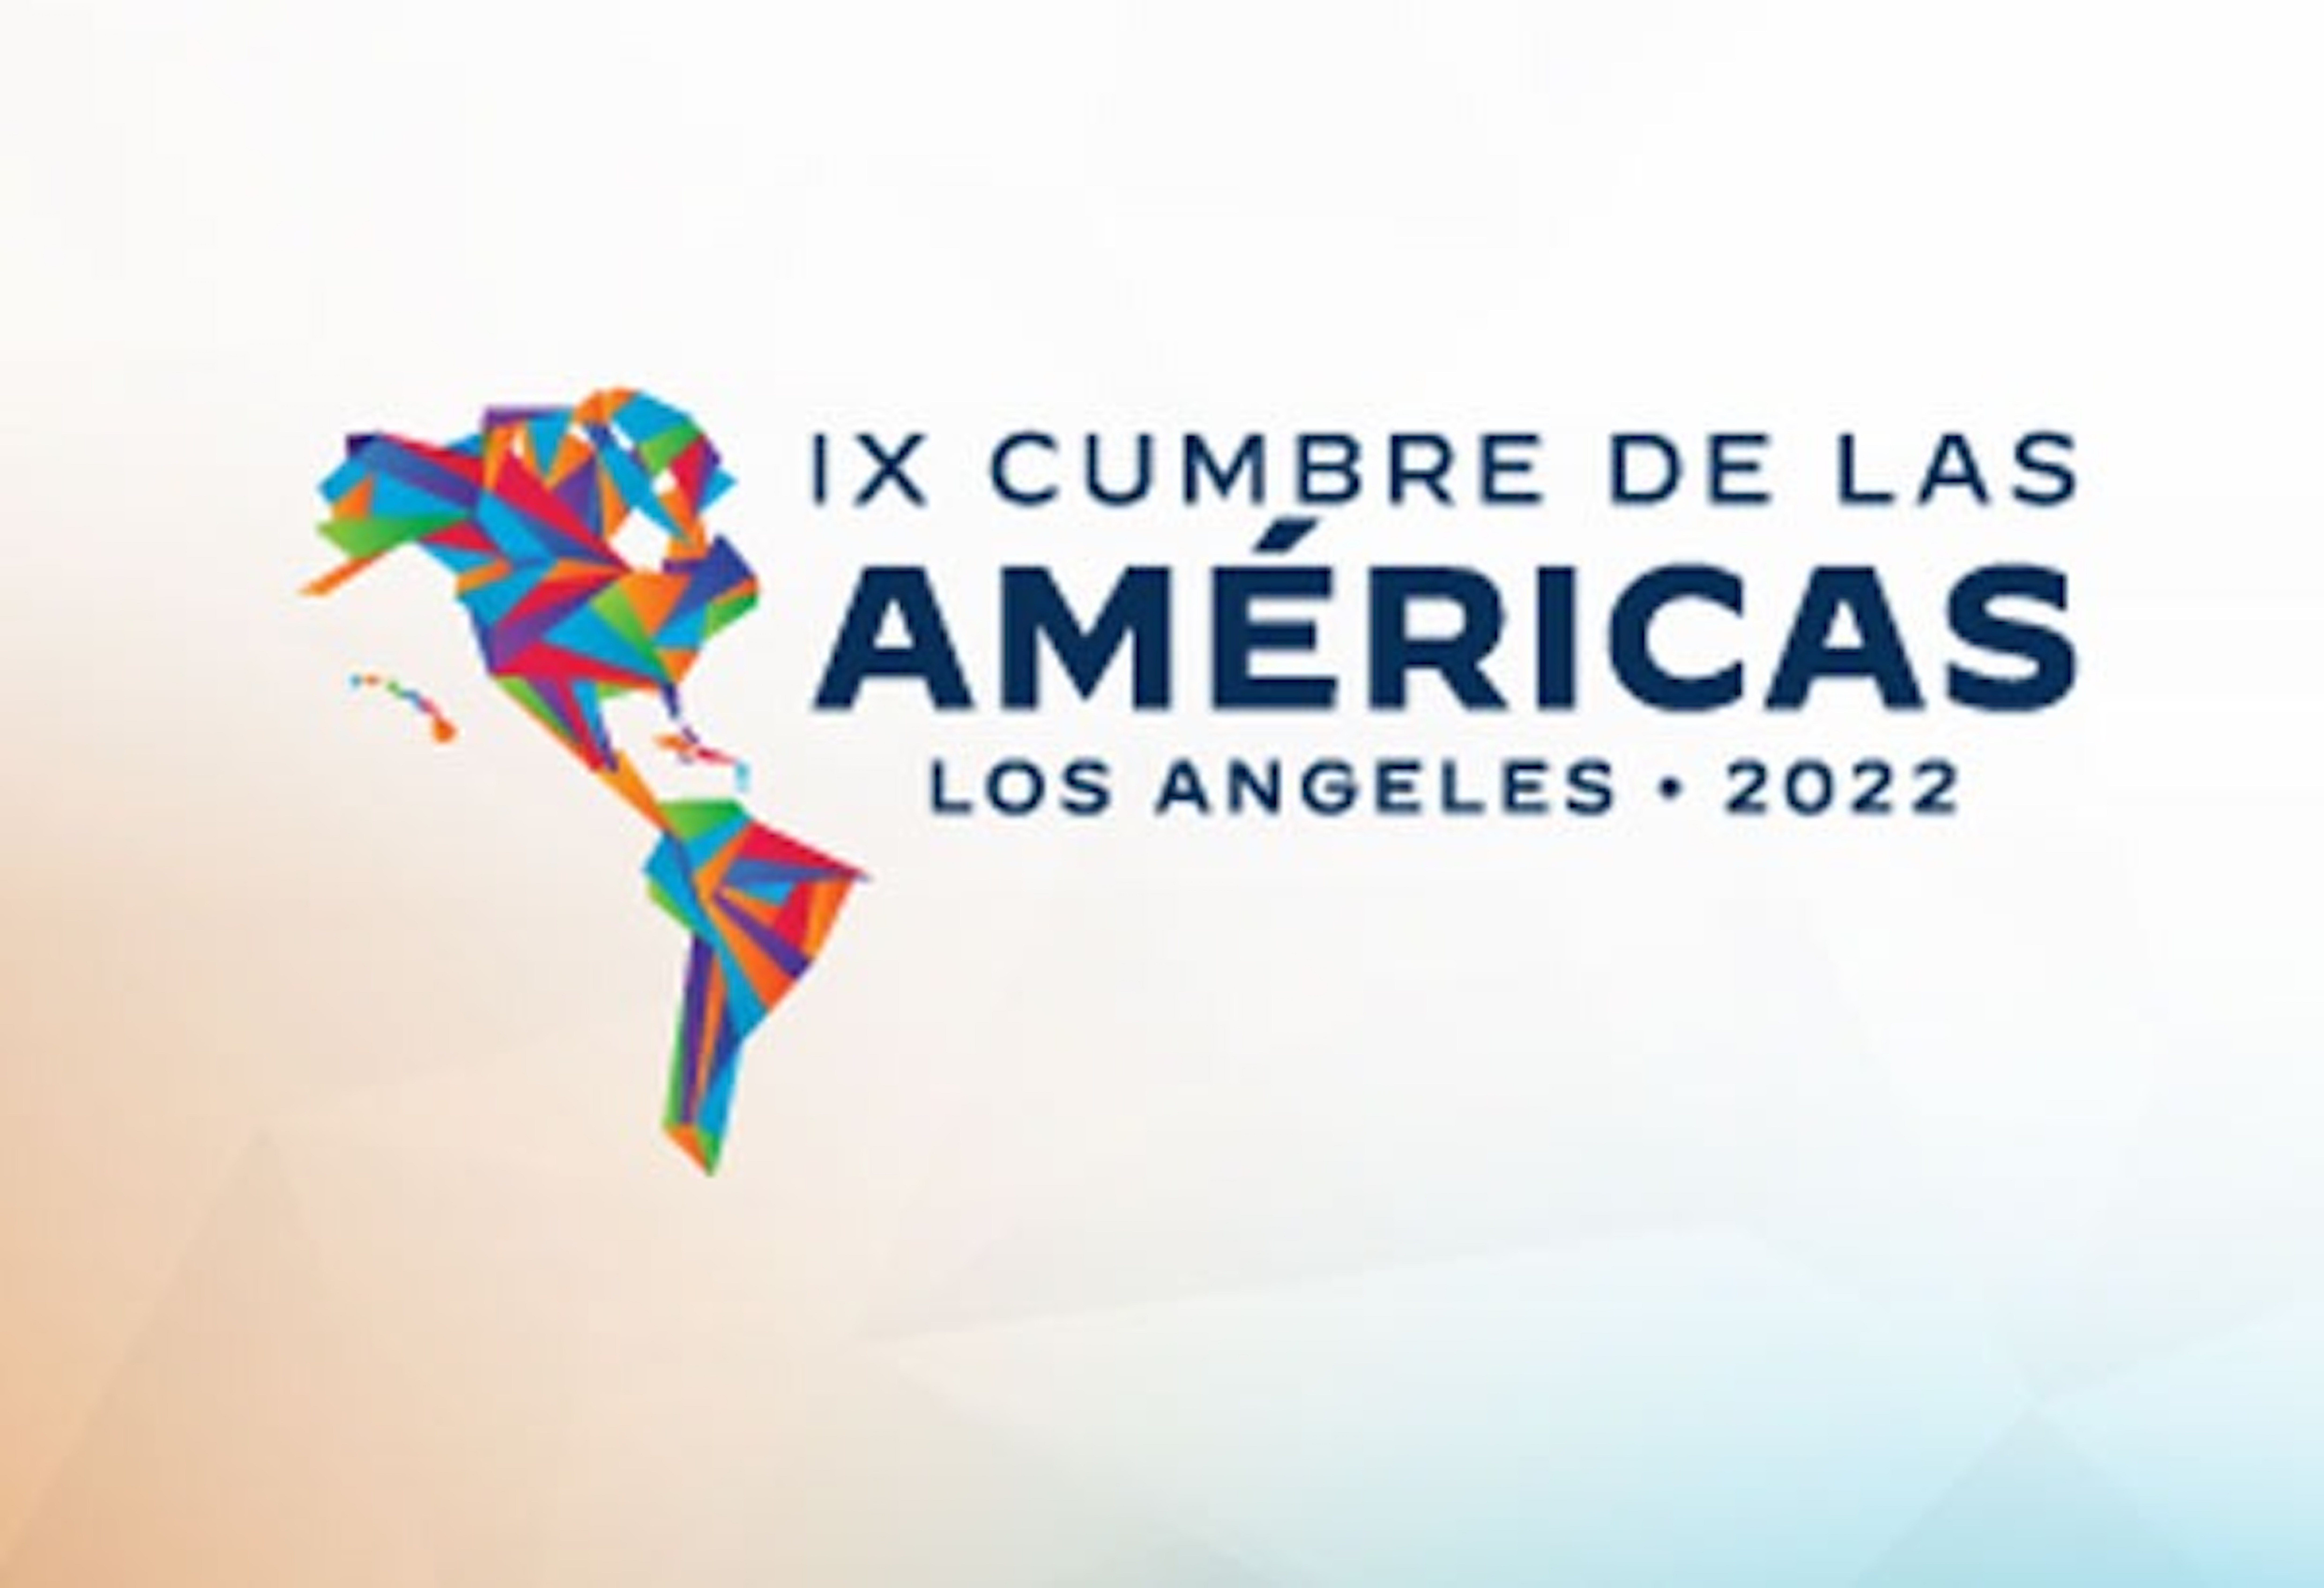 Irrelevance and clashes at the Summit of the Americas